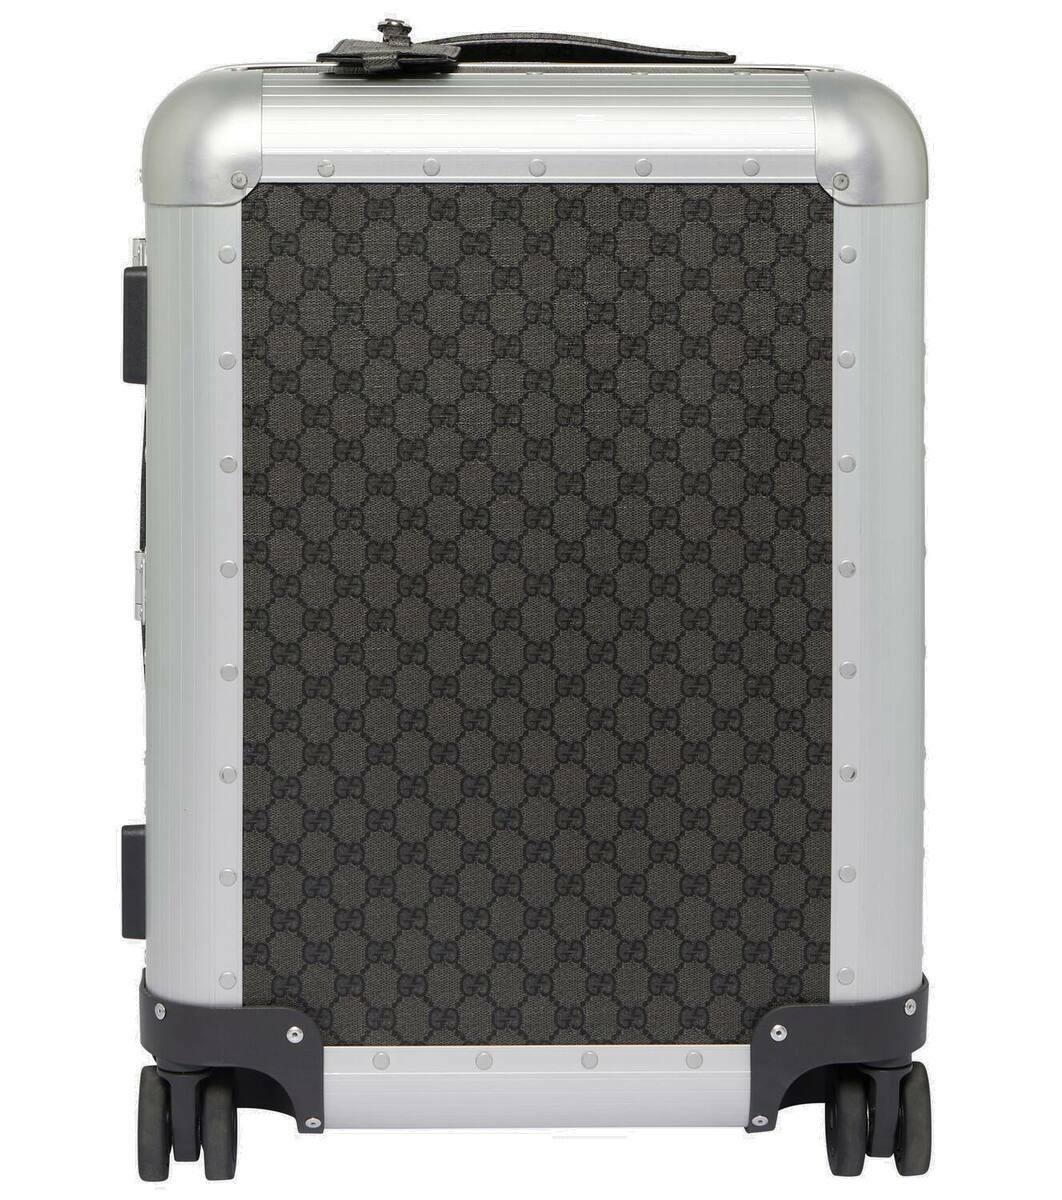 Photo: Gucci Gucci Porter carry-on suitcase